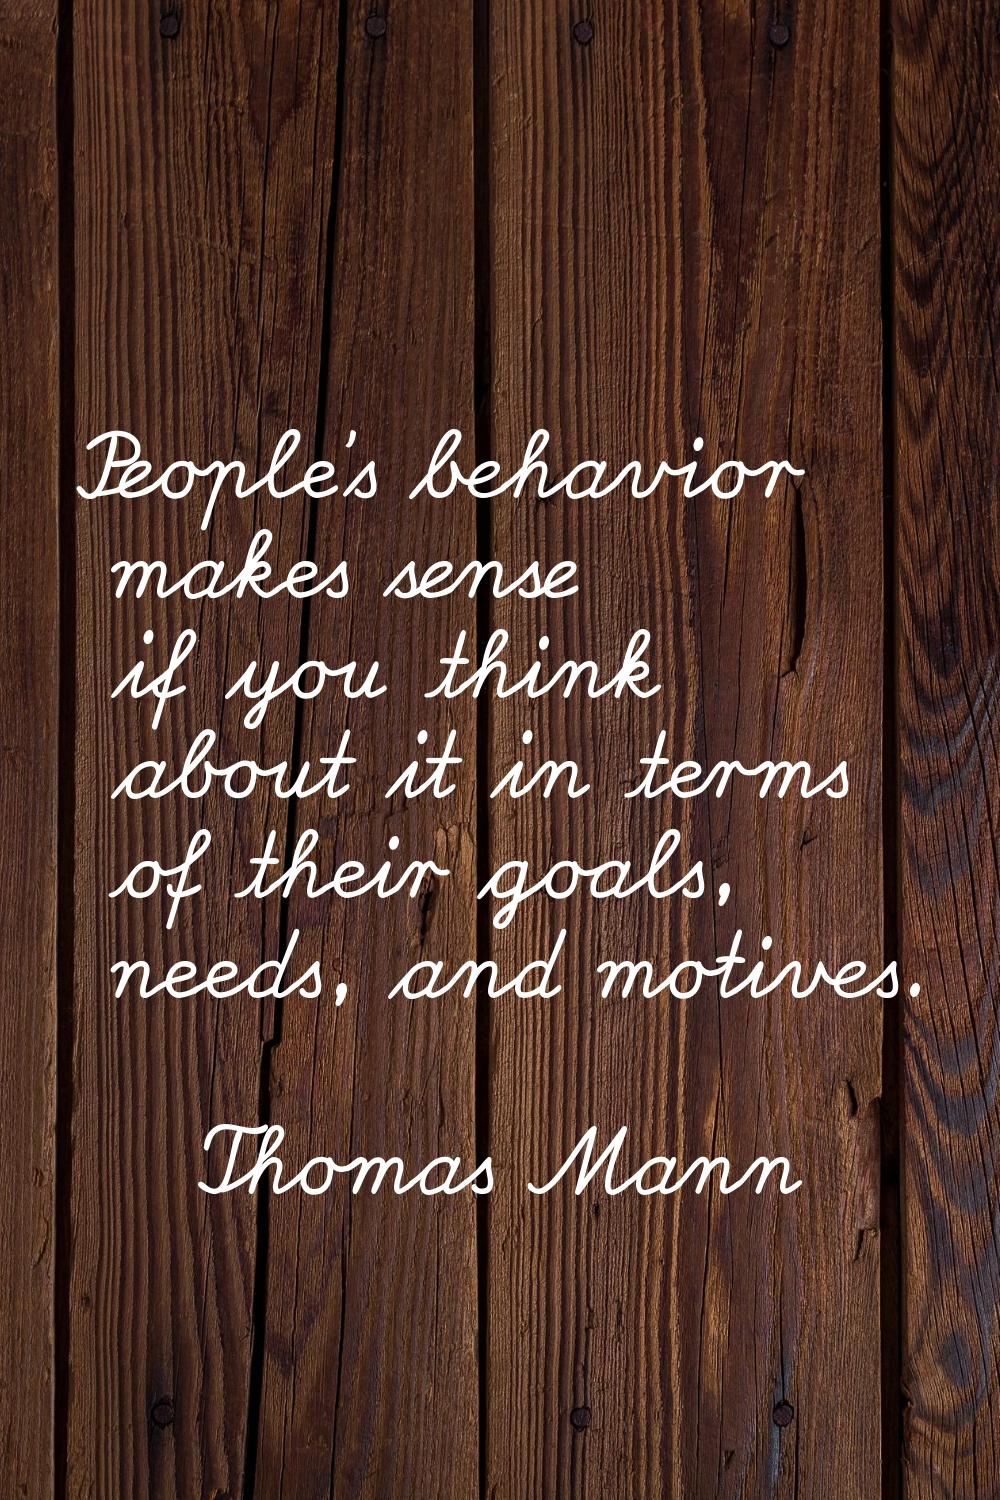 People's behavior makes sense if you think about it in terms of their goals, needs, and motives.